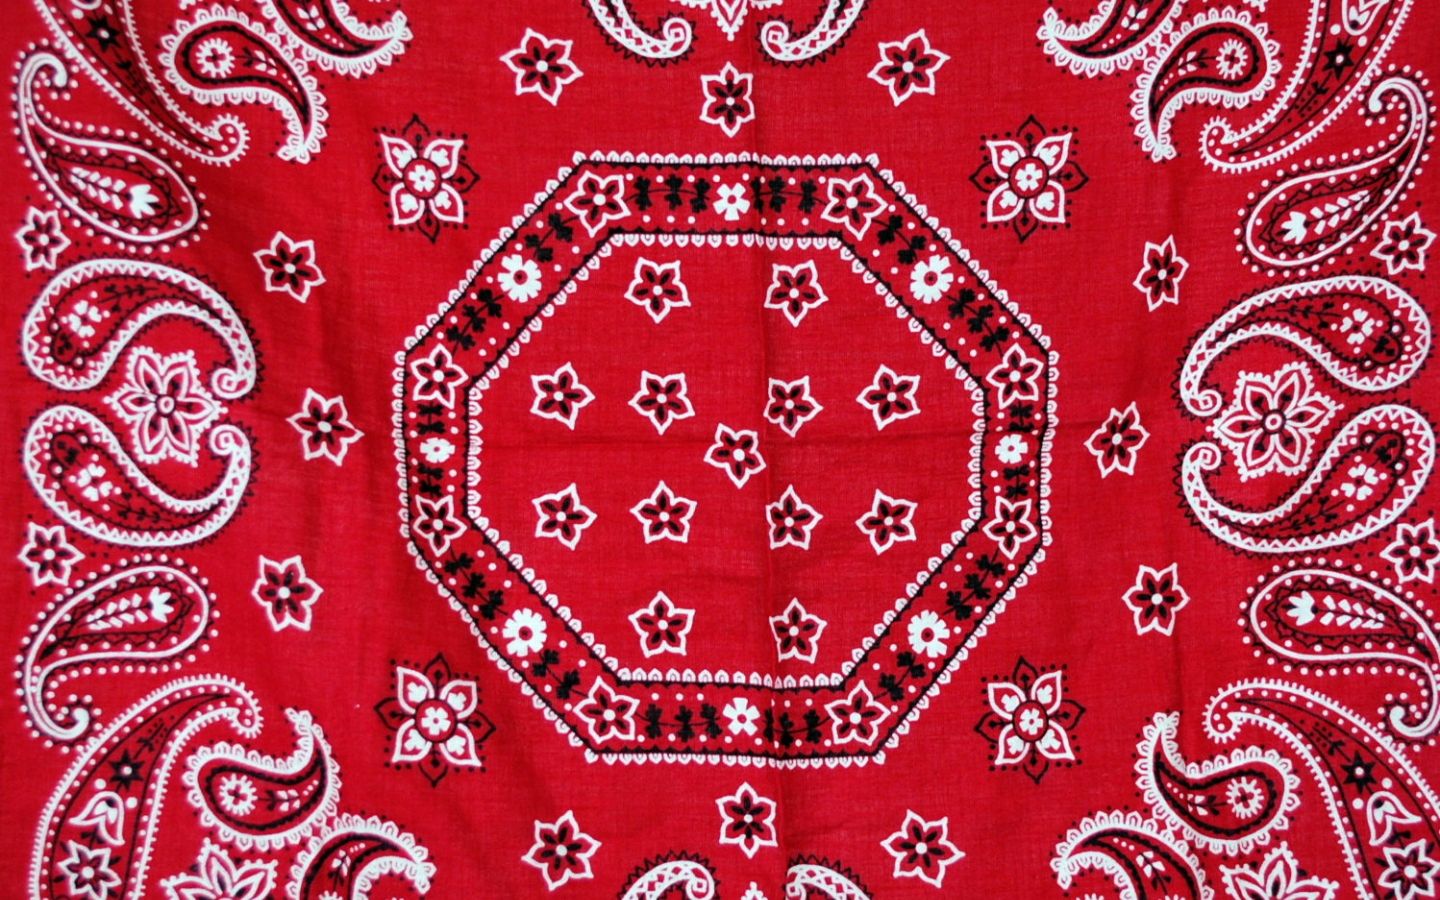 Free download Red Bandana Wallpaper HD Wallpaper and Picture [1498x1218] for your Desktop, Mobile & Tablet. Explore Bandana Print Wallpaper. Red Bandana Wallpaper, Blue Bandana Wallpaper, Black Bandana Wallpaper